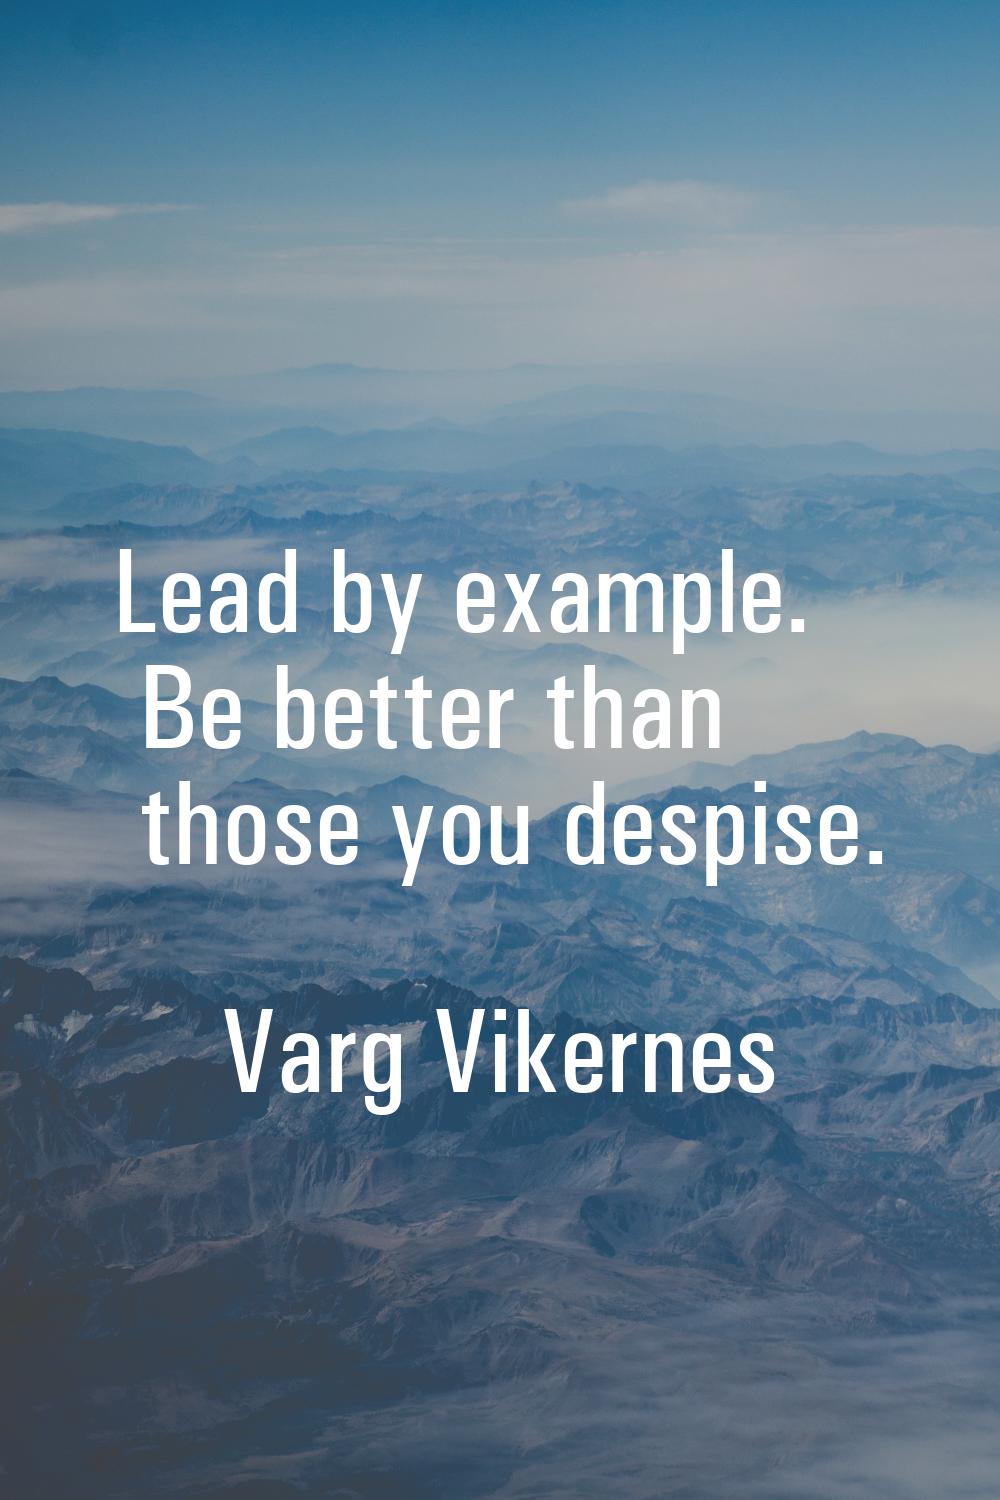 Lead by example. Be better than those you despise.